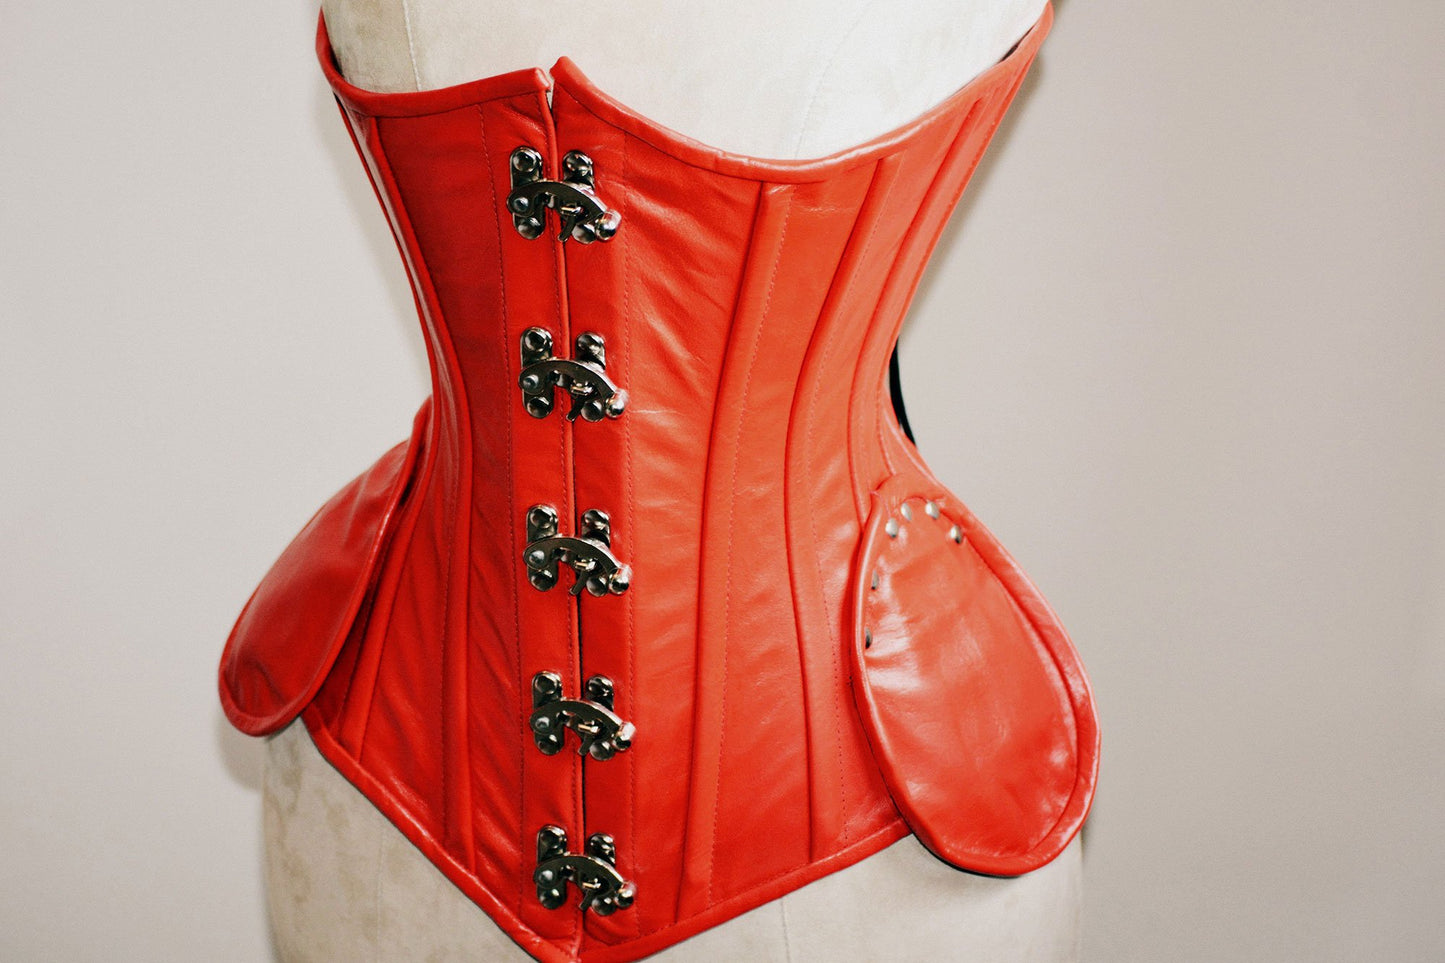 Exclusive lambskin long corset on steel bones, black, brown, white, red.  Gothic, steampunk, bdsm, authentic waist training corset for tall